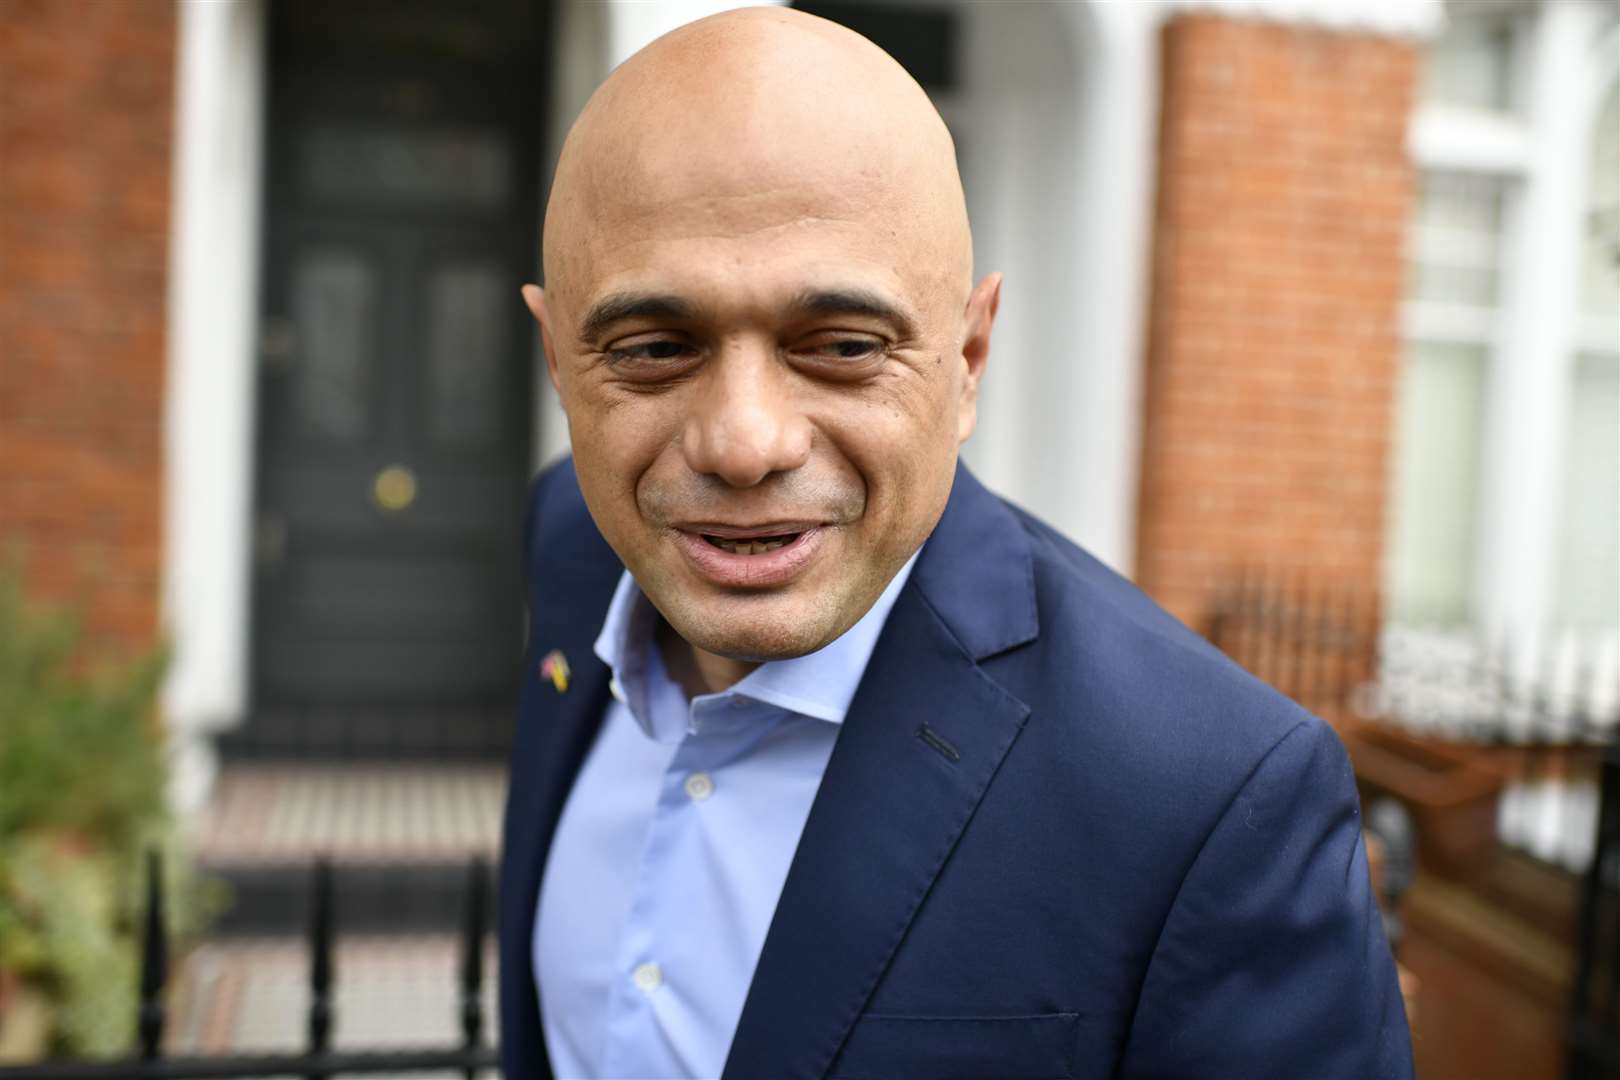 Mr Javid cited personal integrity (Beresford Hodge/PA)